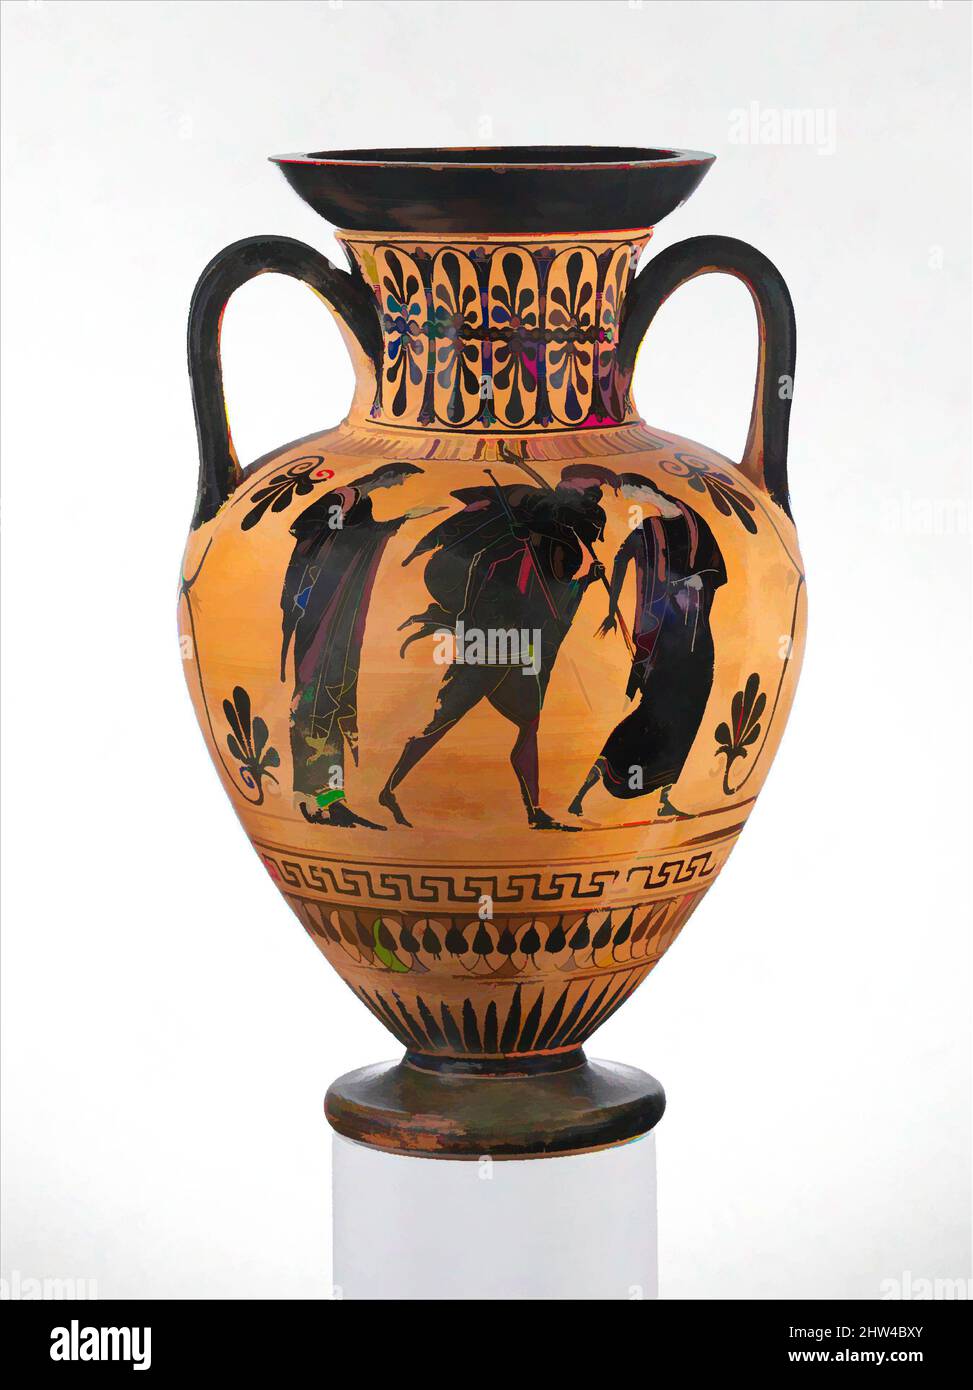 Art inspired by Terracotta neck-amphora (jar), Archaic, last quarter of 6th century B.C., Greek, Attic, Terracotta; black-figure, H. 16 1/8 in. (41 cm), Vases, Obverse, Aeneas and Anchises, Reverse, departure of a hoplite and archer. Aeneas is fleeing Troy carrying his aged father on, Classic works modernized by Artotop with a splash of modernity. Shapes, color and value, eye-catching visual impact on art. Emotions through freedom of artworks in a contemporary way. A timeless message pursuing a wildly creative new direction. Artists turning to the digital medium and creating the Artotop NFT Stock Photo